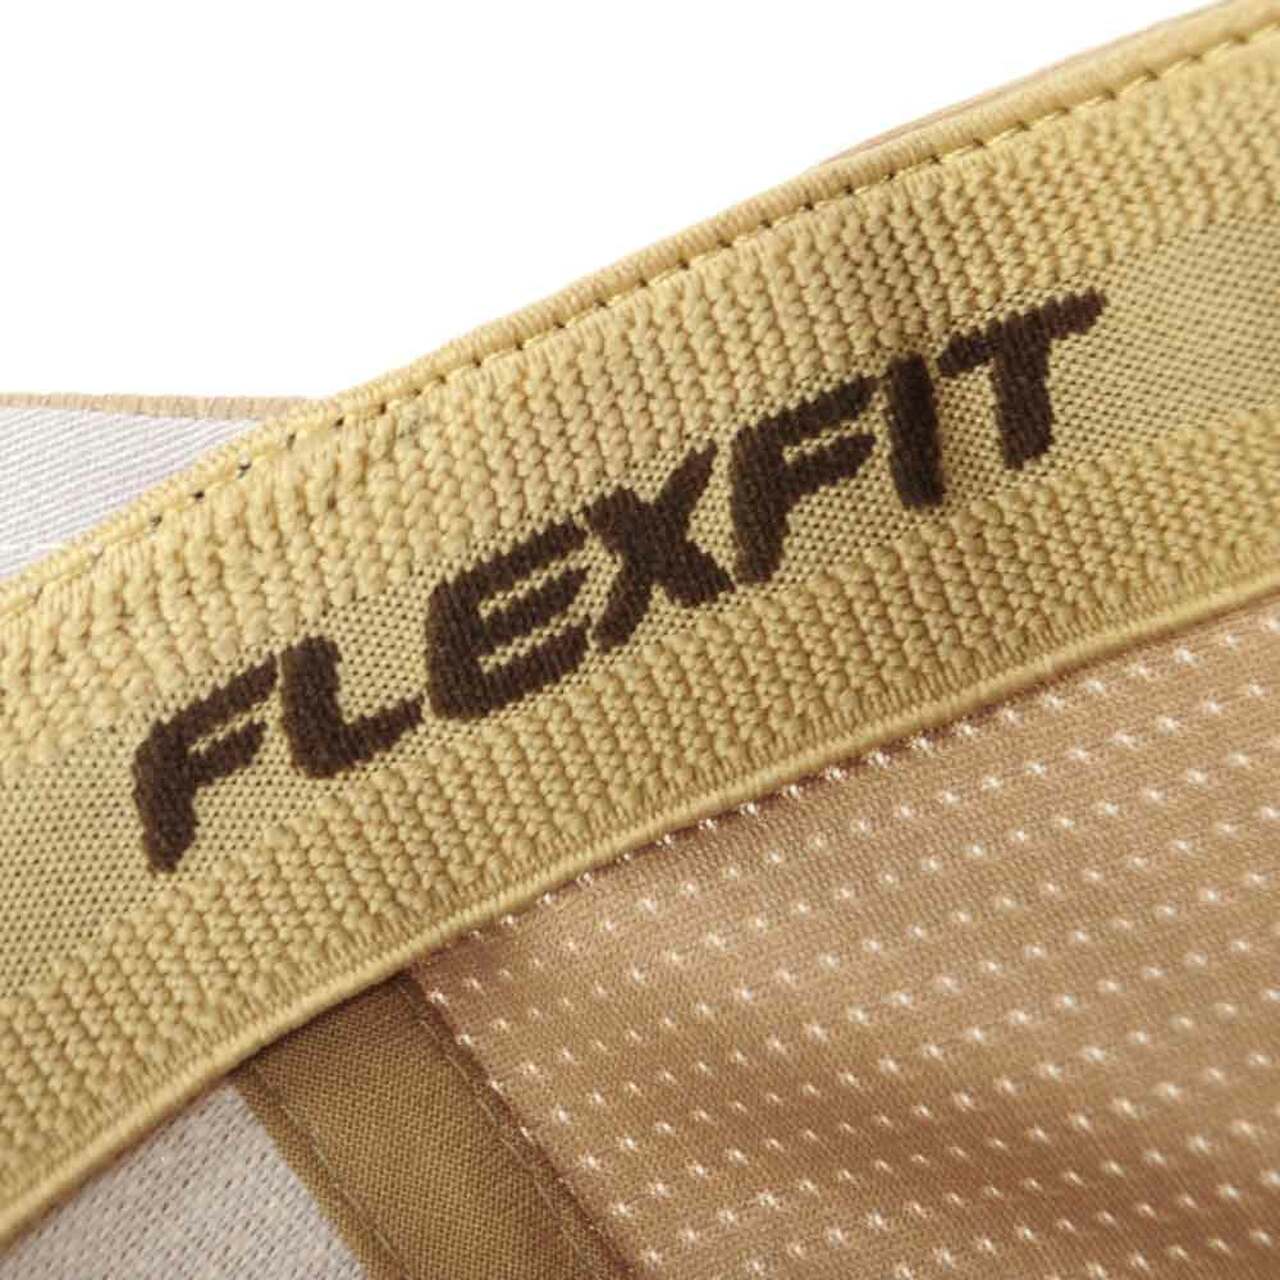 Flexfit Cool And Dry Calocks Tricot